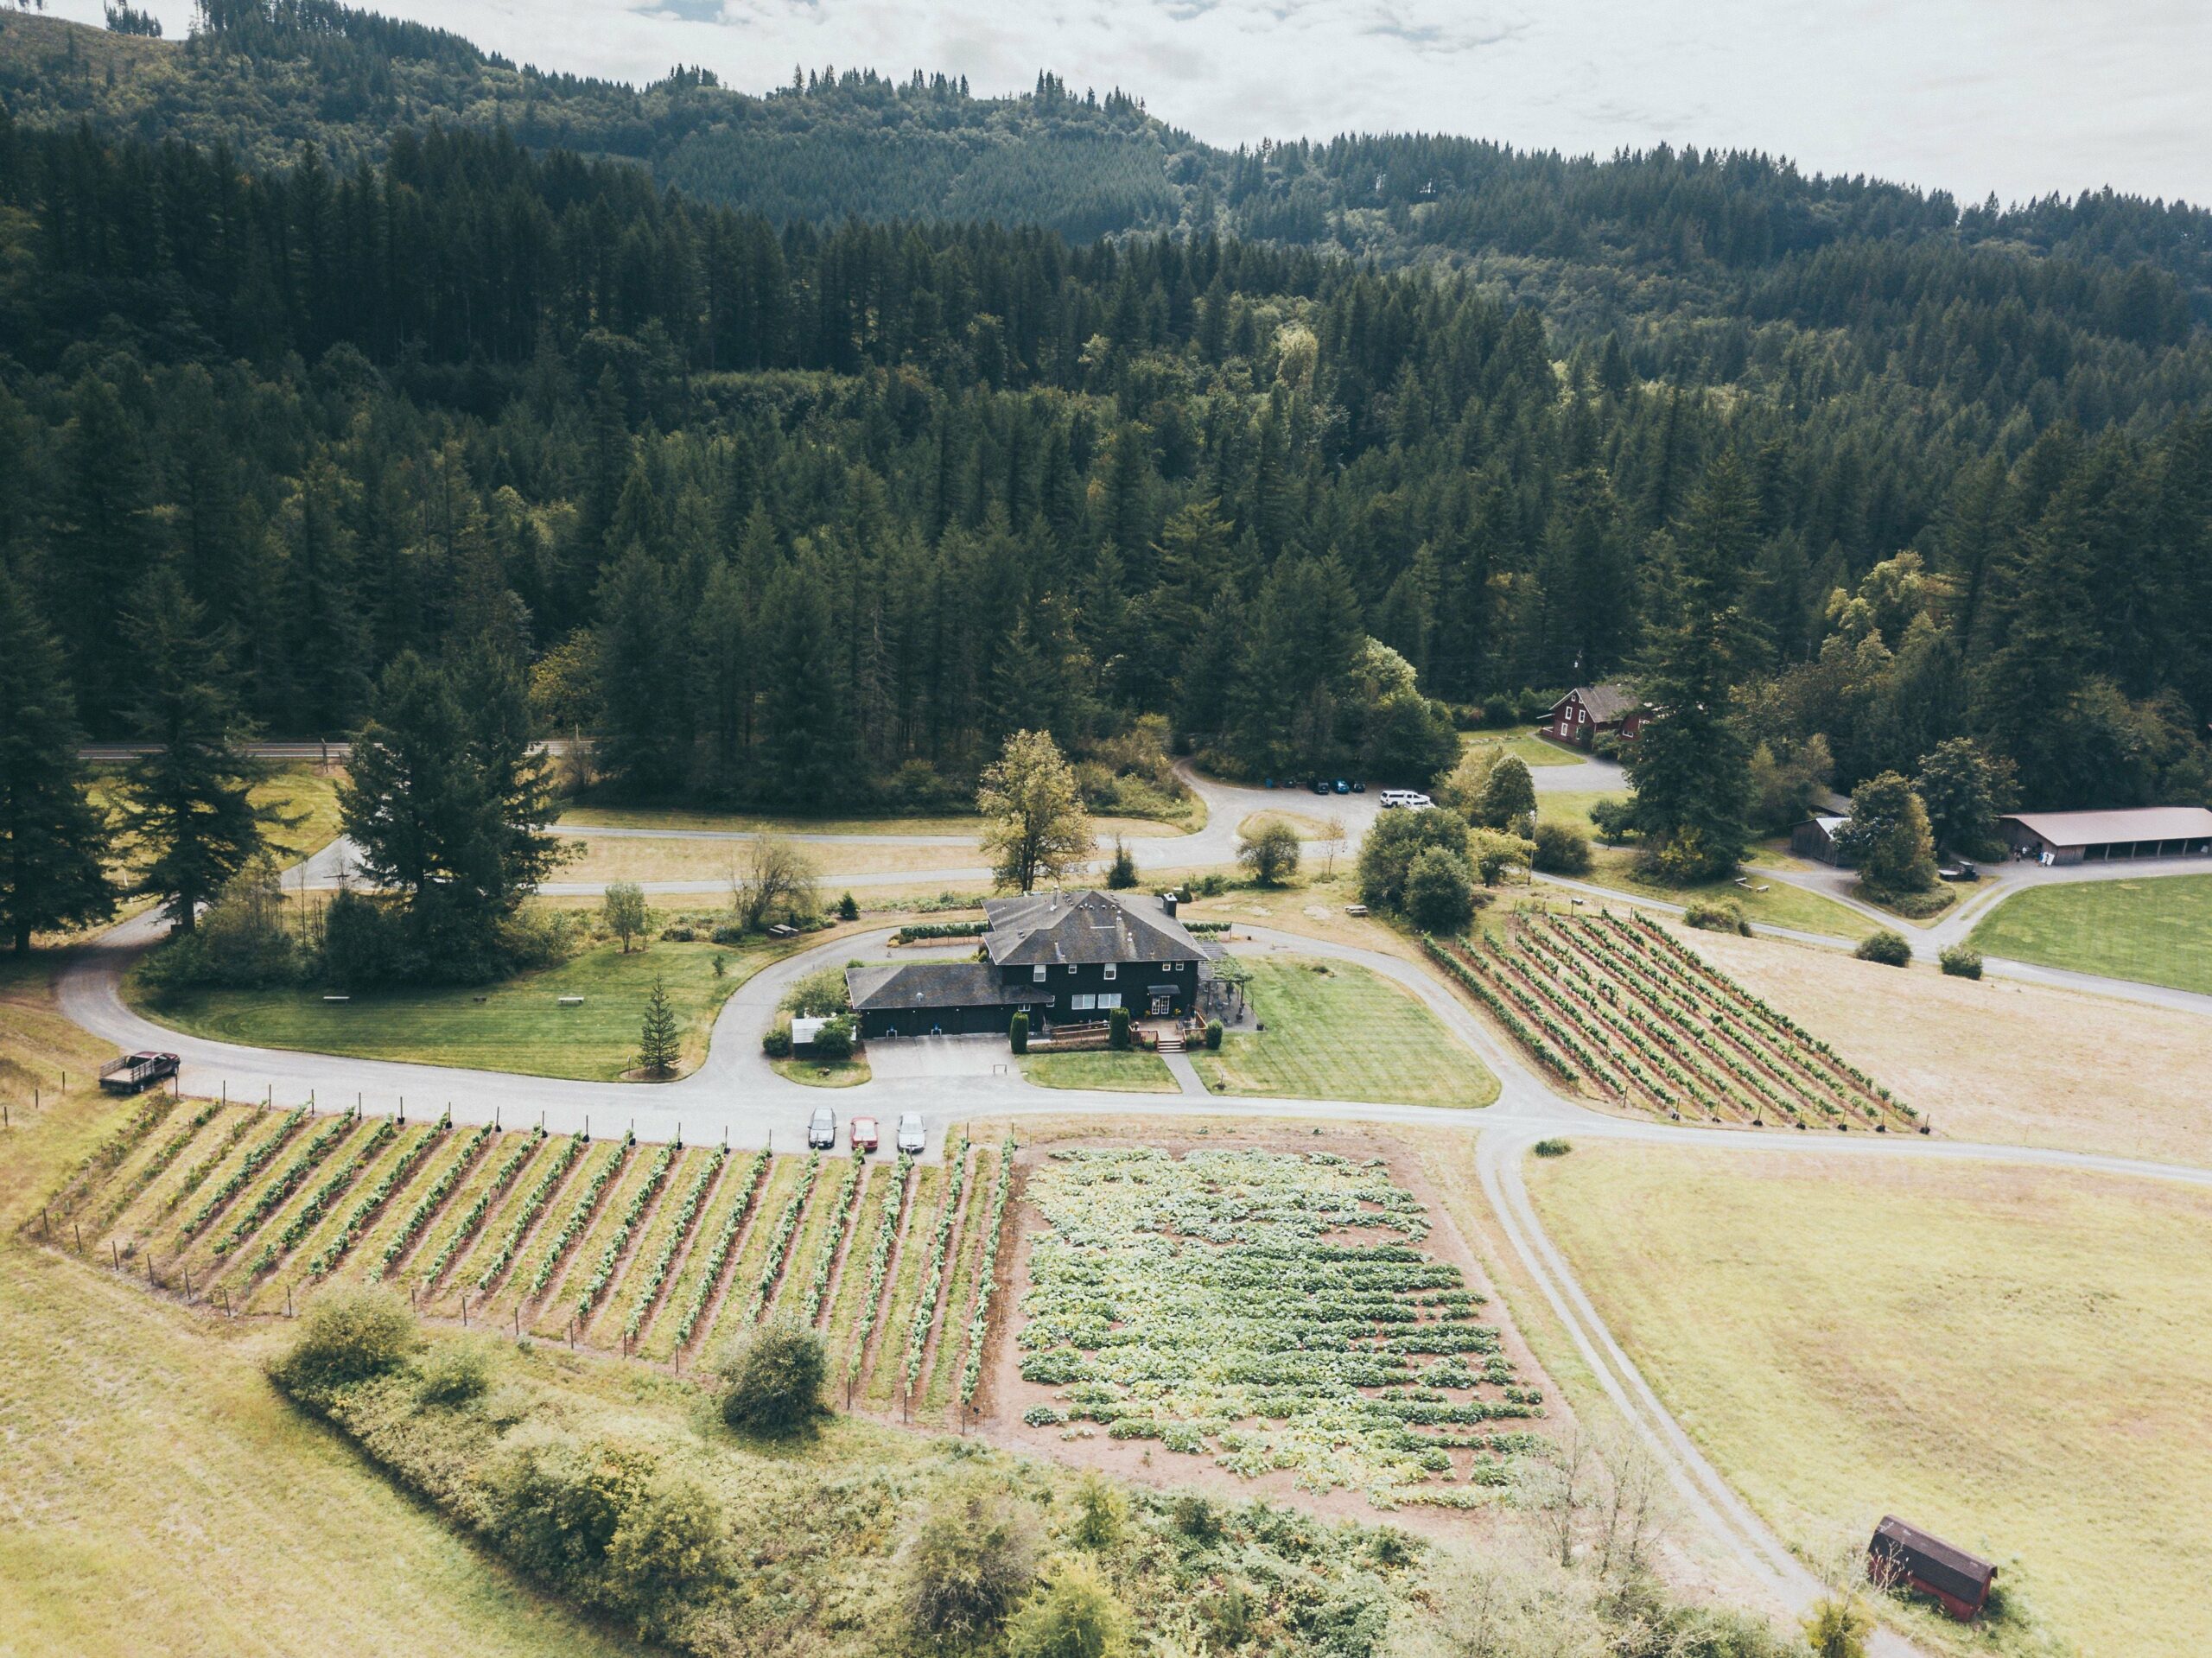 Aerial Landscape of Pomeroy Cellars Terrain featuring a Vintage House Woods and Wine Fields